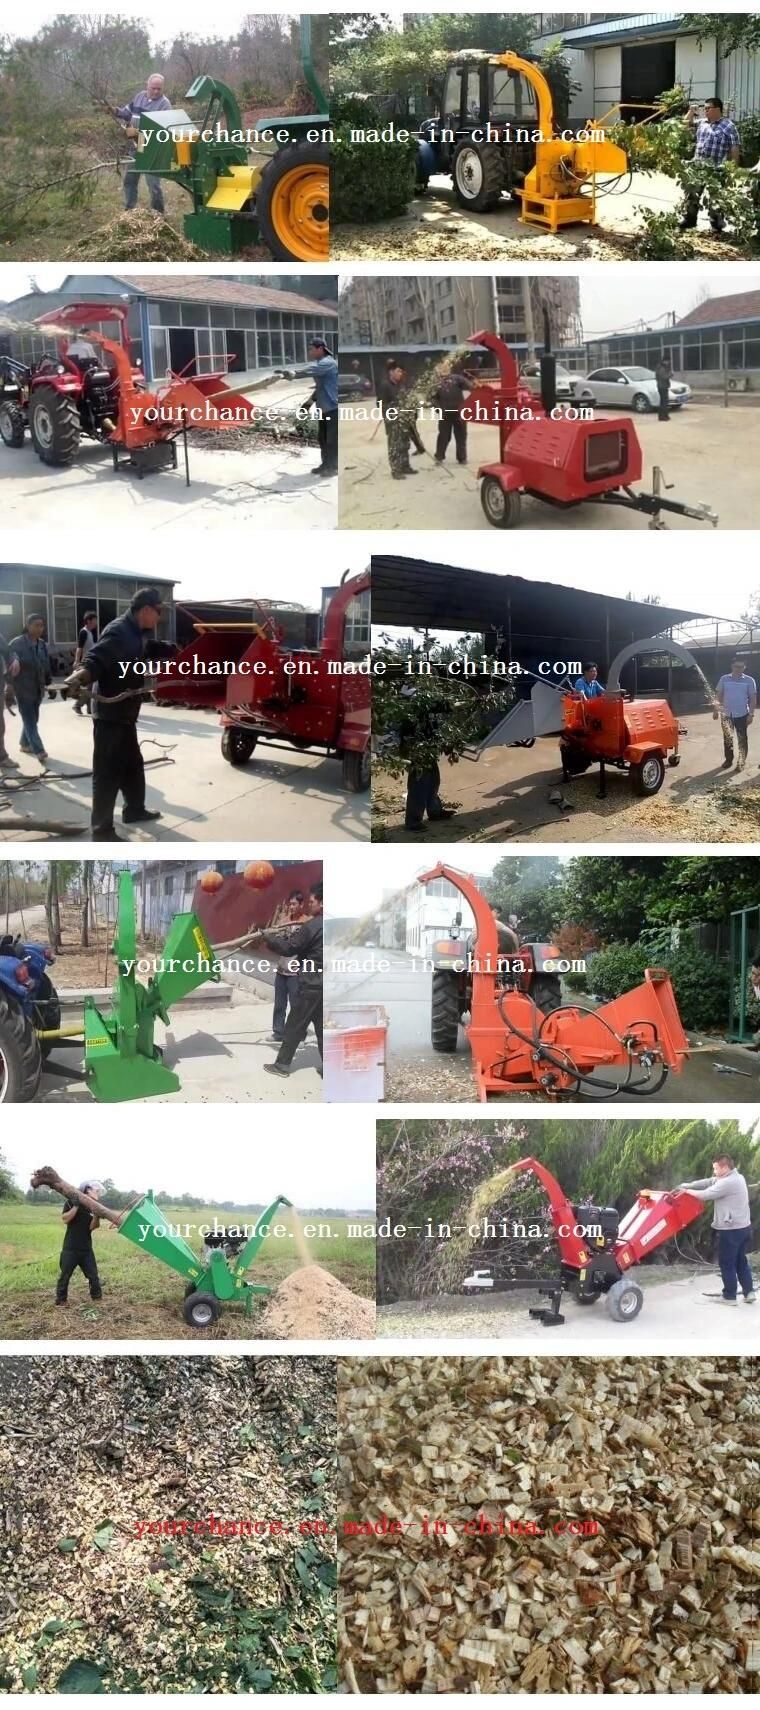 Russia Hot Sale Wc-6h Tractor 3 Point Hitch Pto Drive Hydraulic Feeding Type Wood Chipper Shredder Wood Chipping Machine